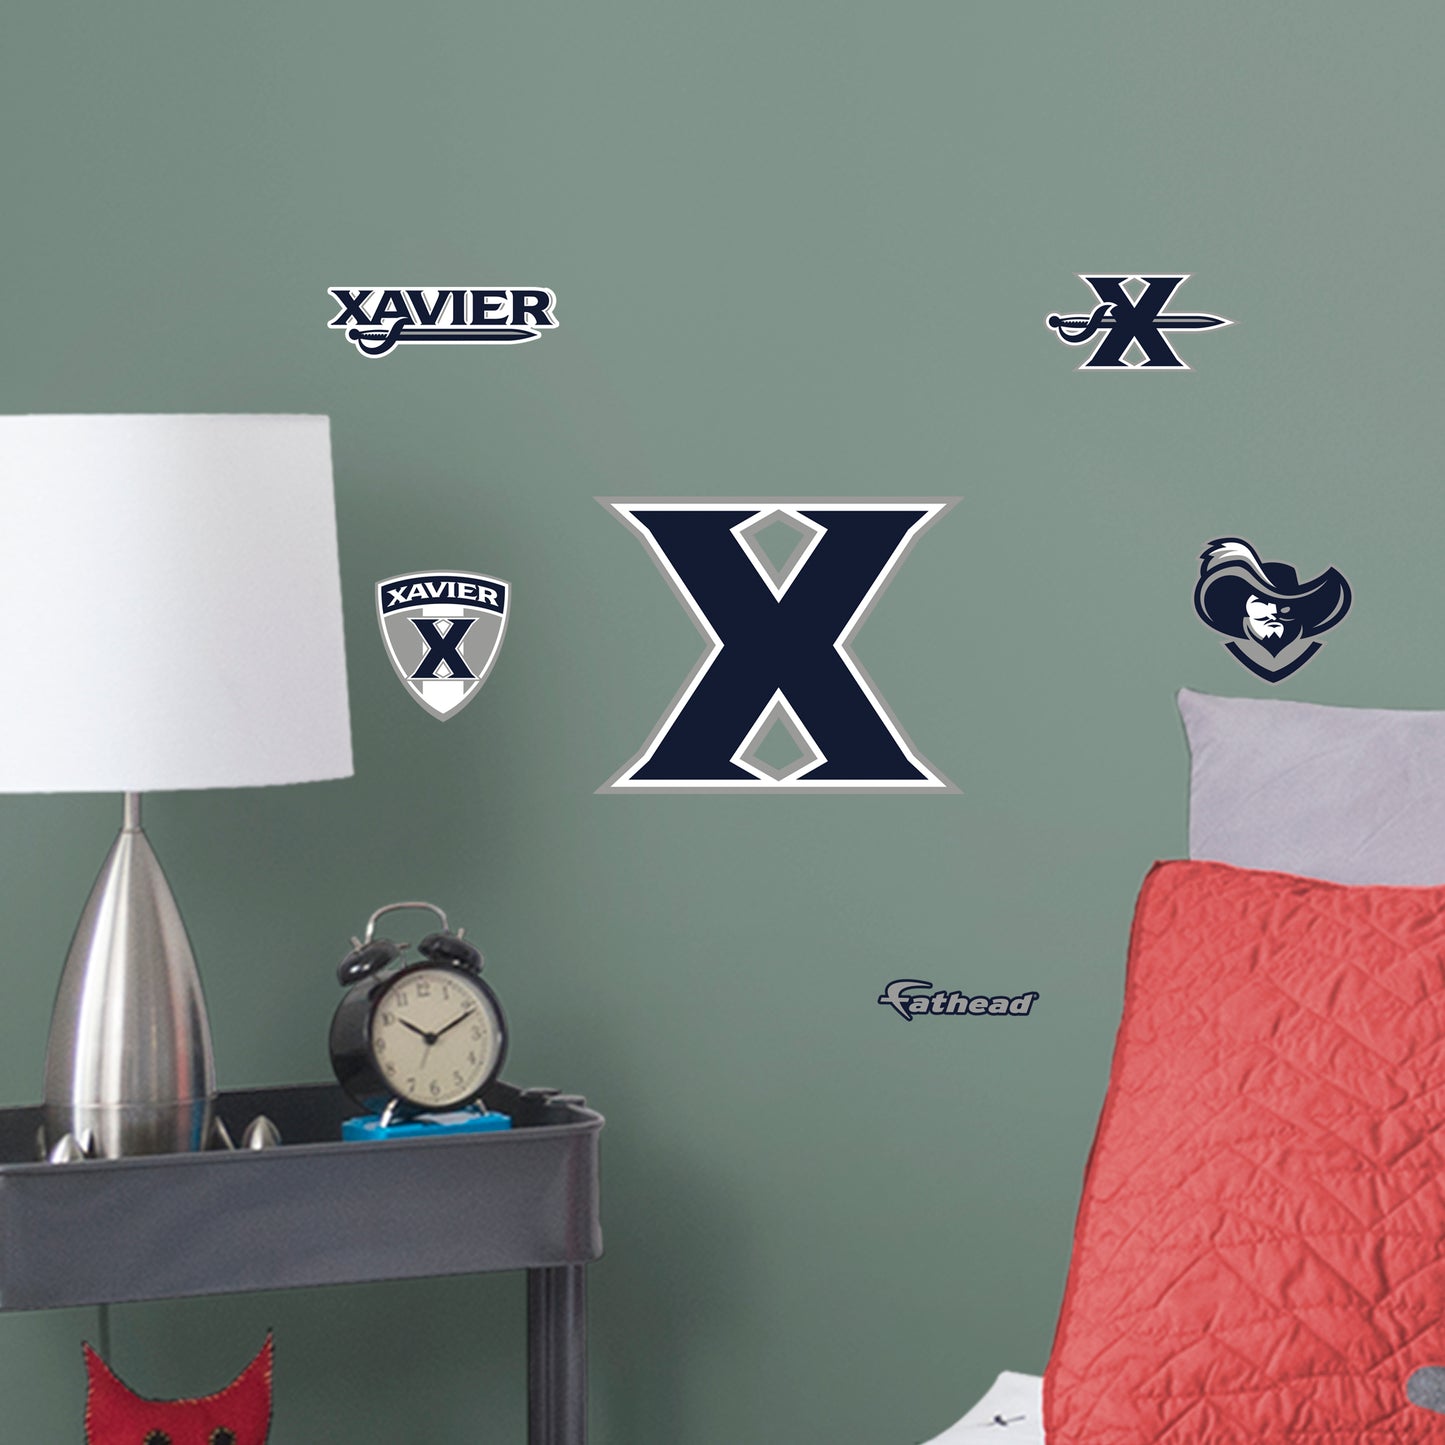 Xavier Musketeers 2020 POD Teammate Logo  - Officially Licensed NCAA Removable Wall Decal